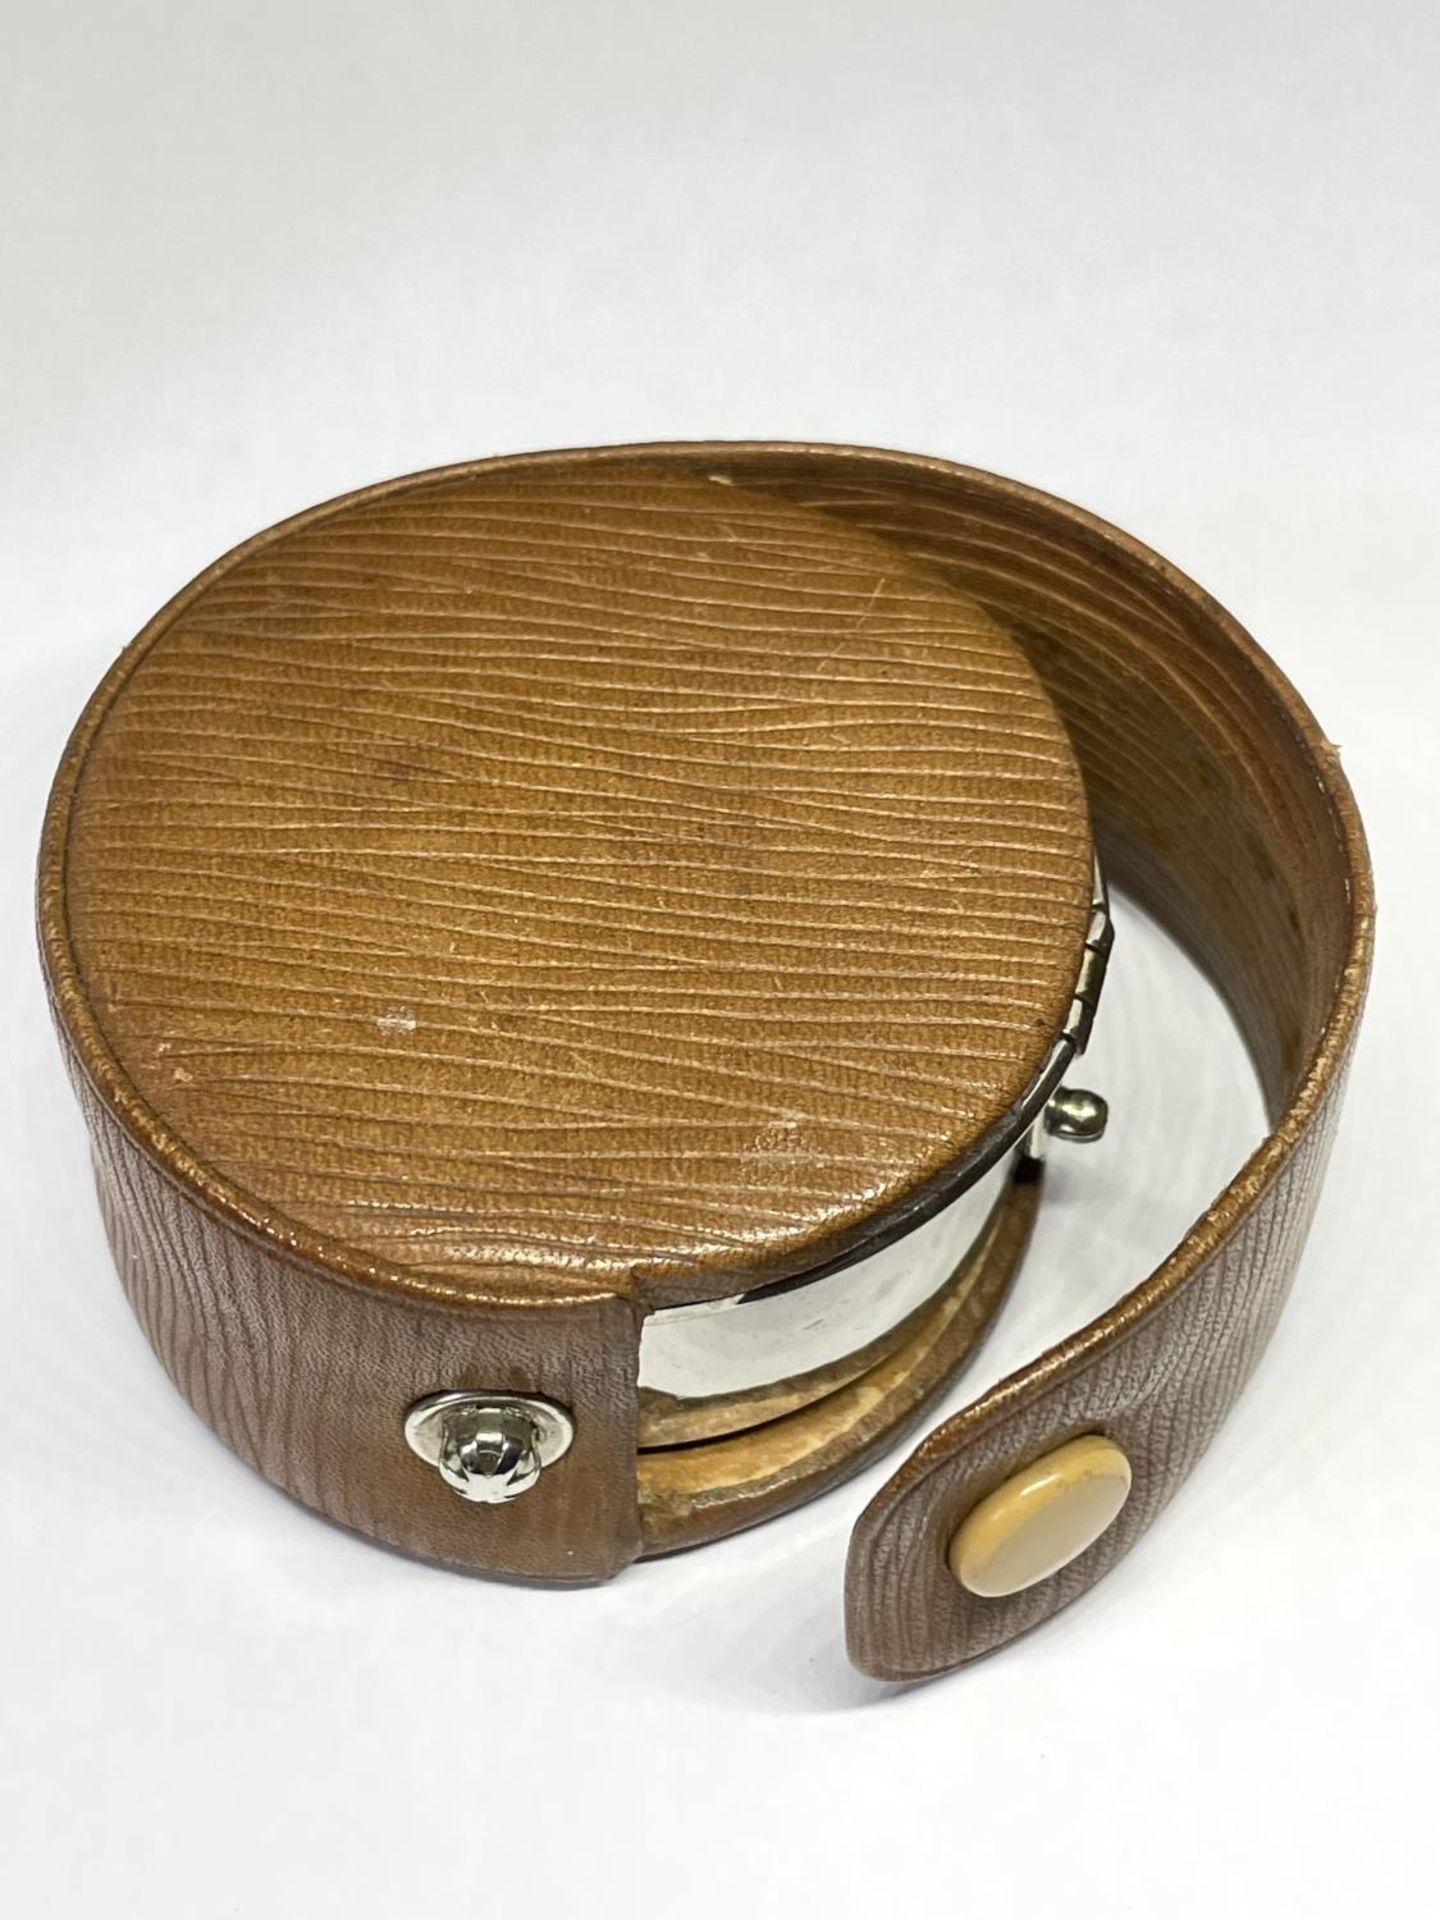 A CASED TRAVEL CUP WITH HANDLE - Image 3 of 3